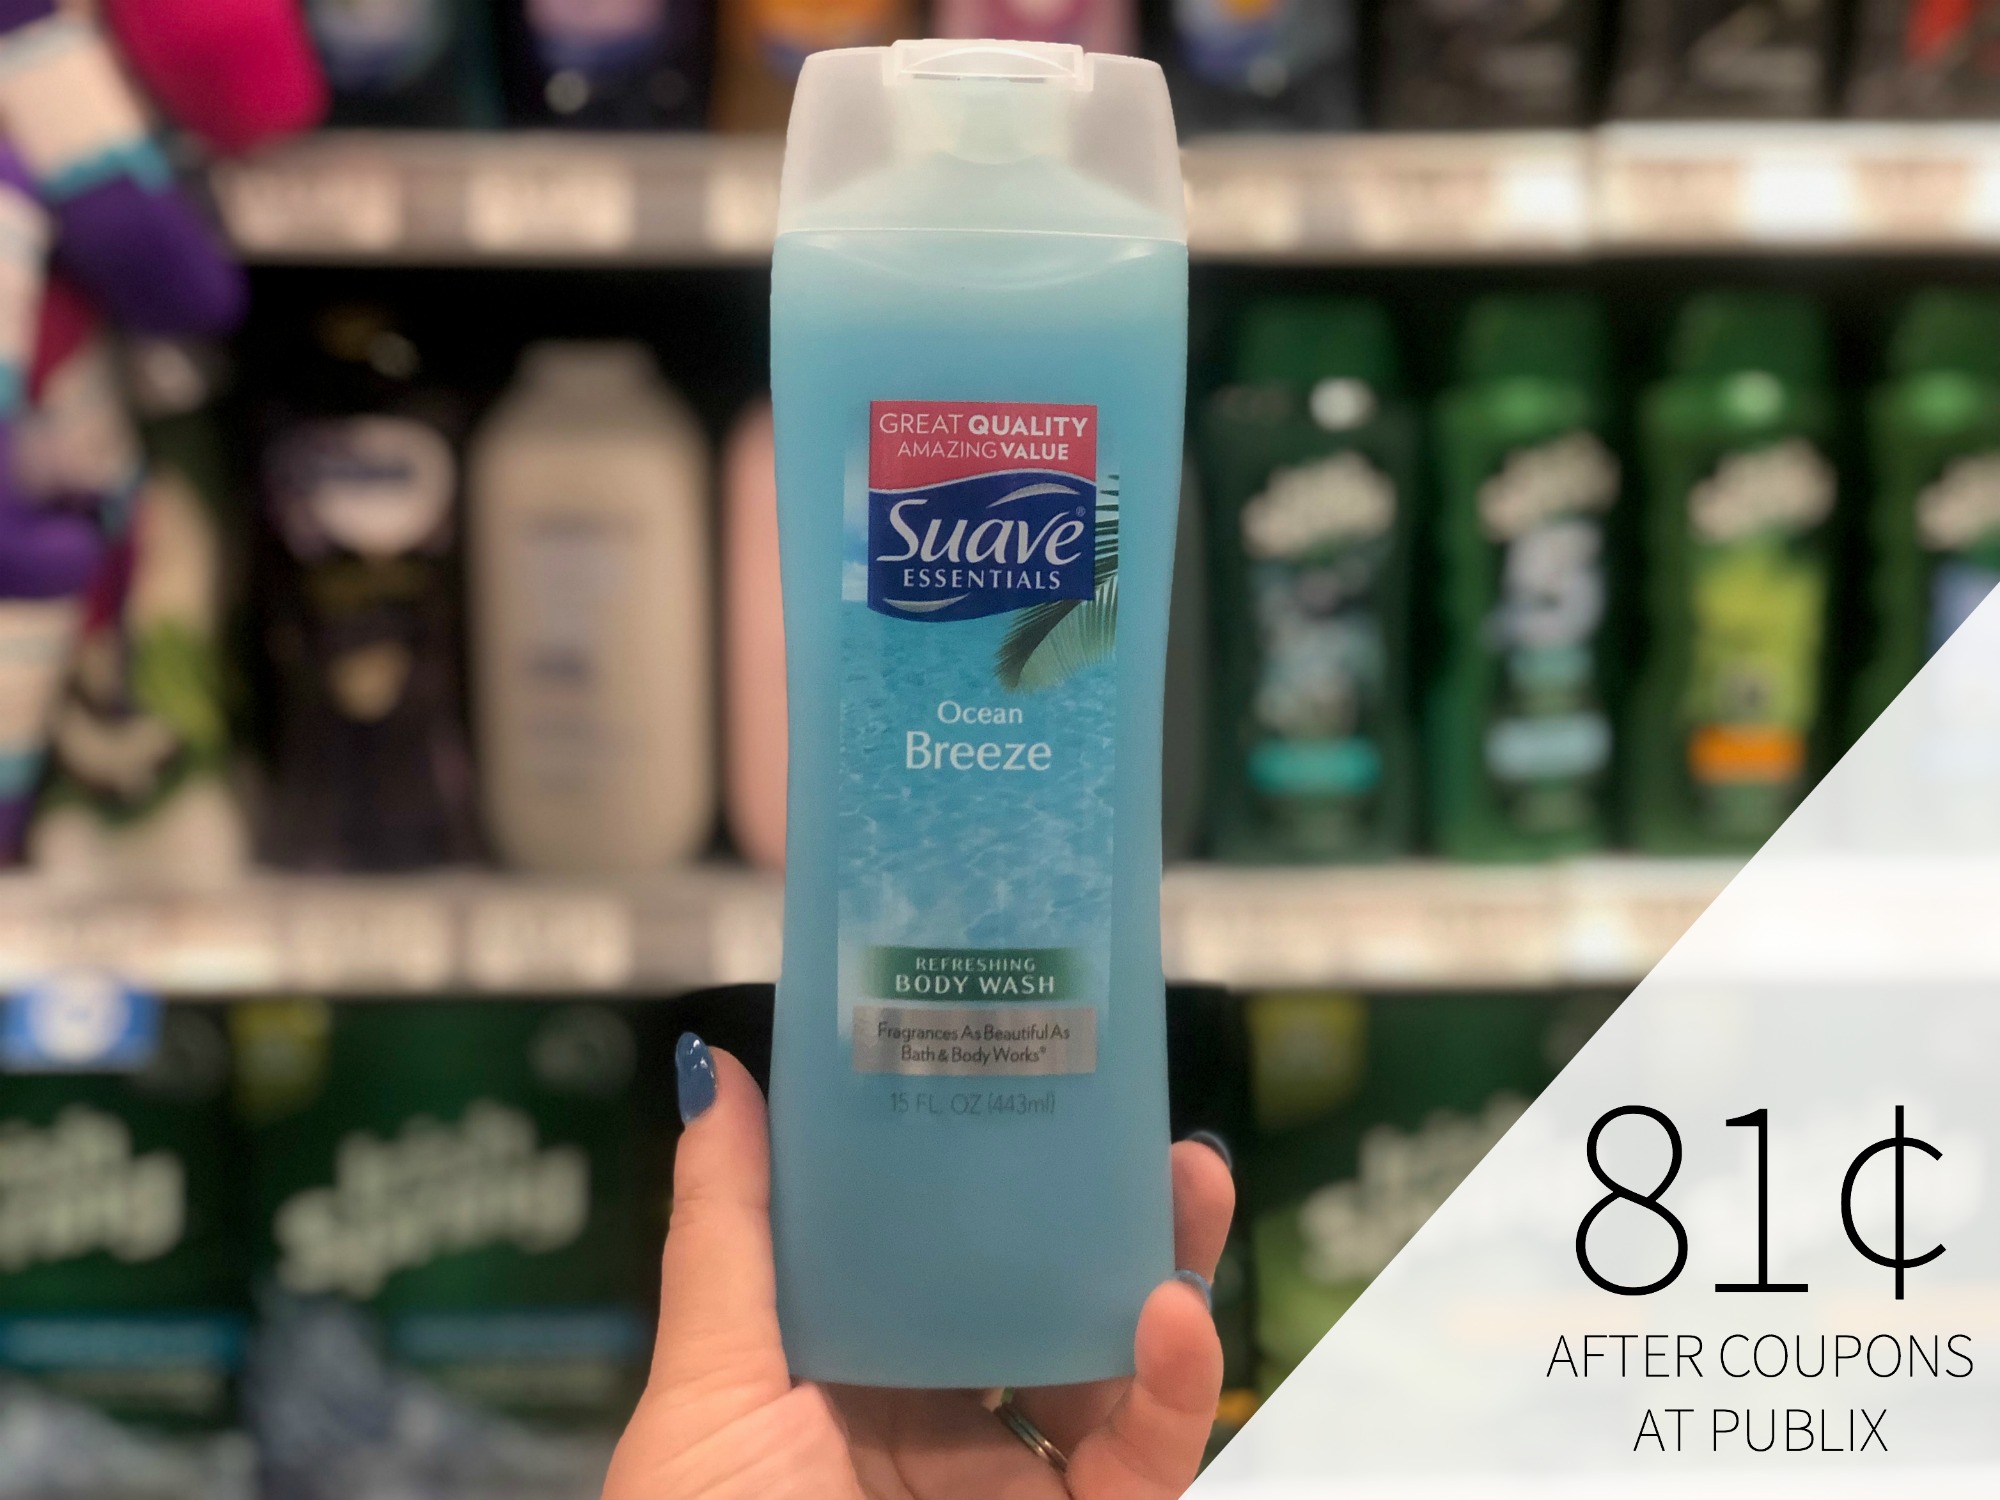 Save On Personal Care Products For The Whole Family - Save On Dove, Suave & Love Beauty and Planet Products At Publix on I Heart Publix